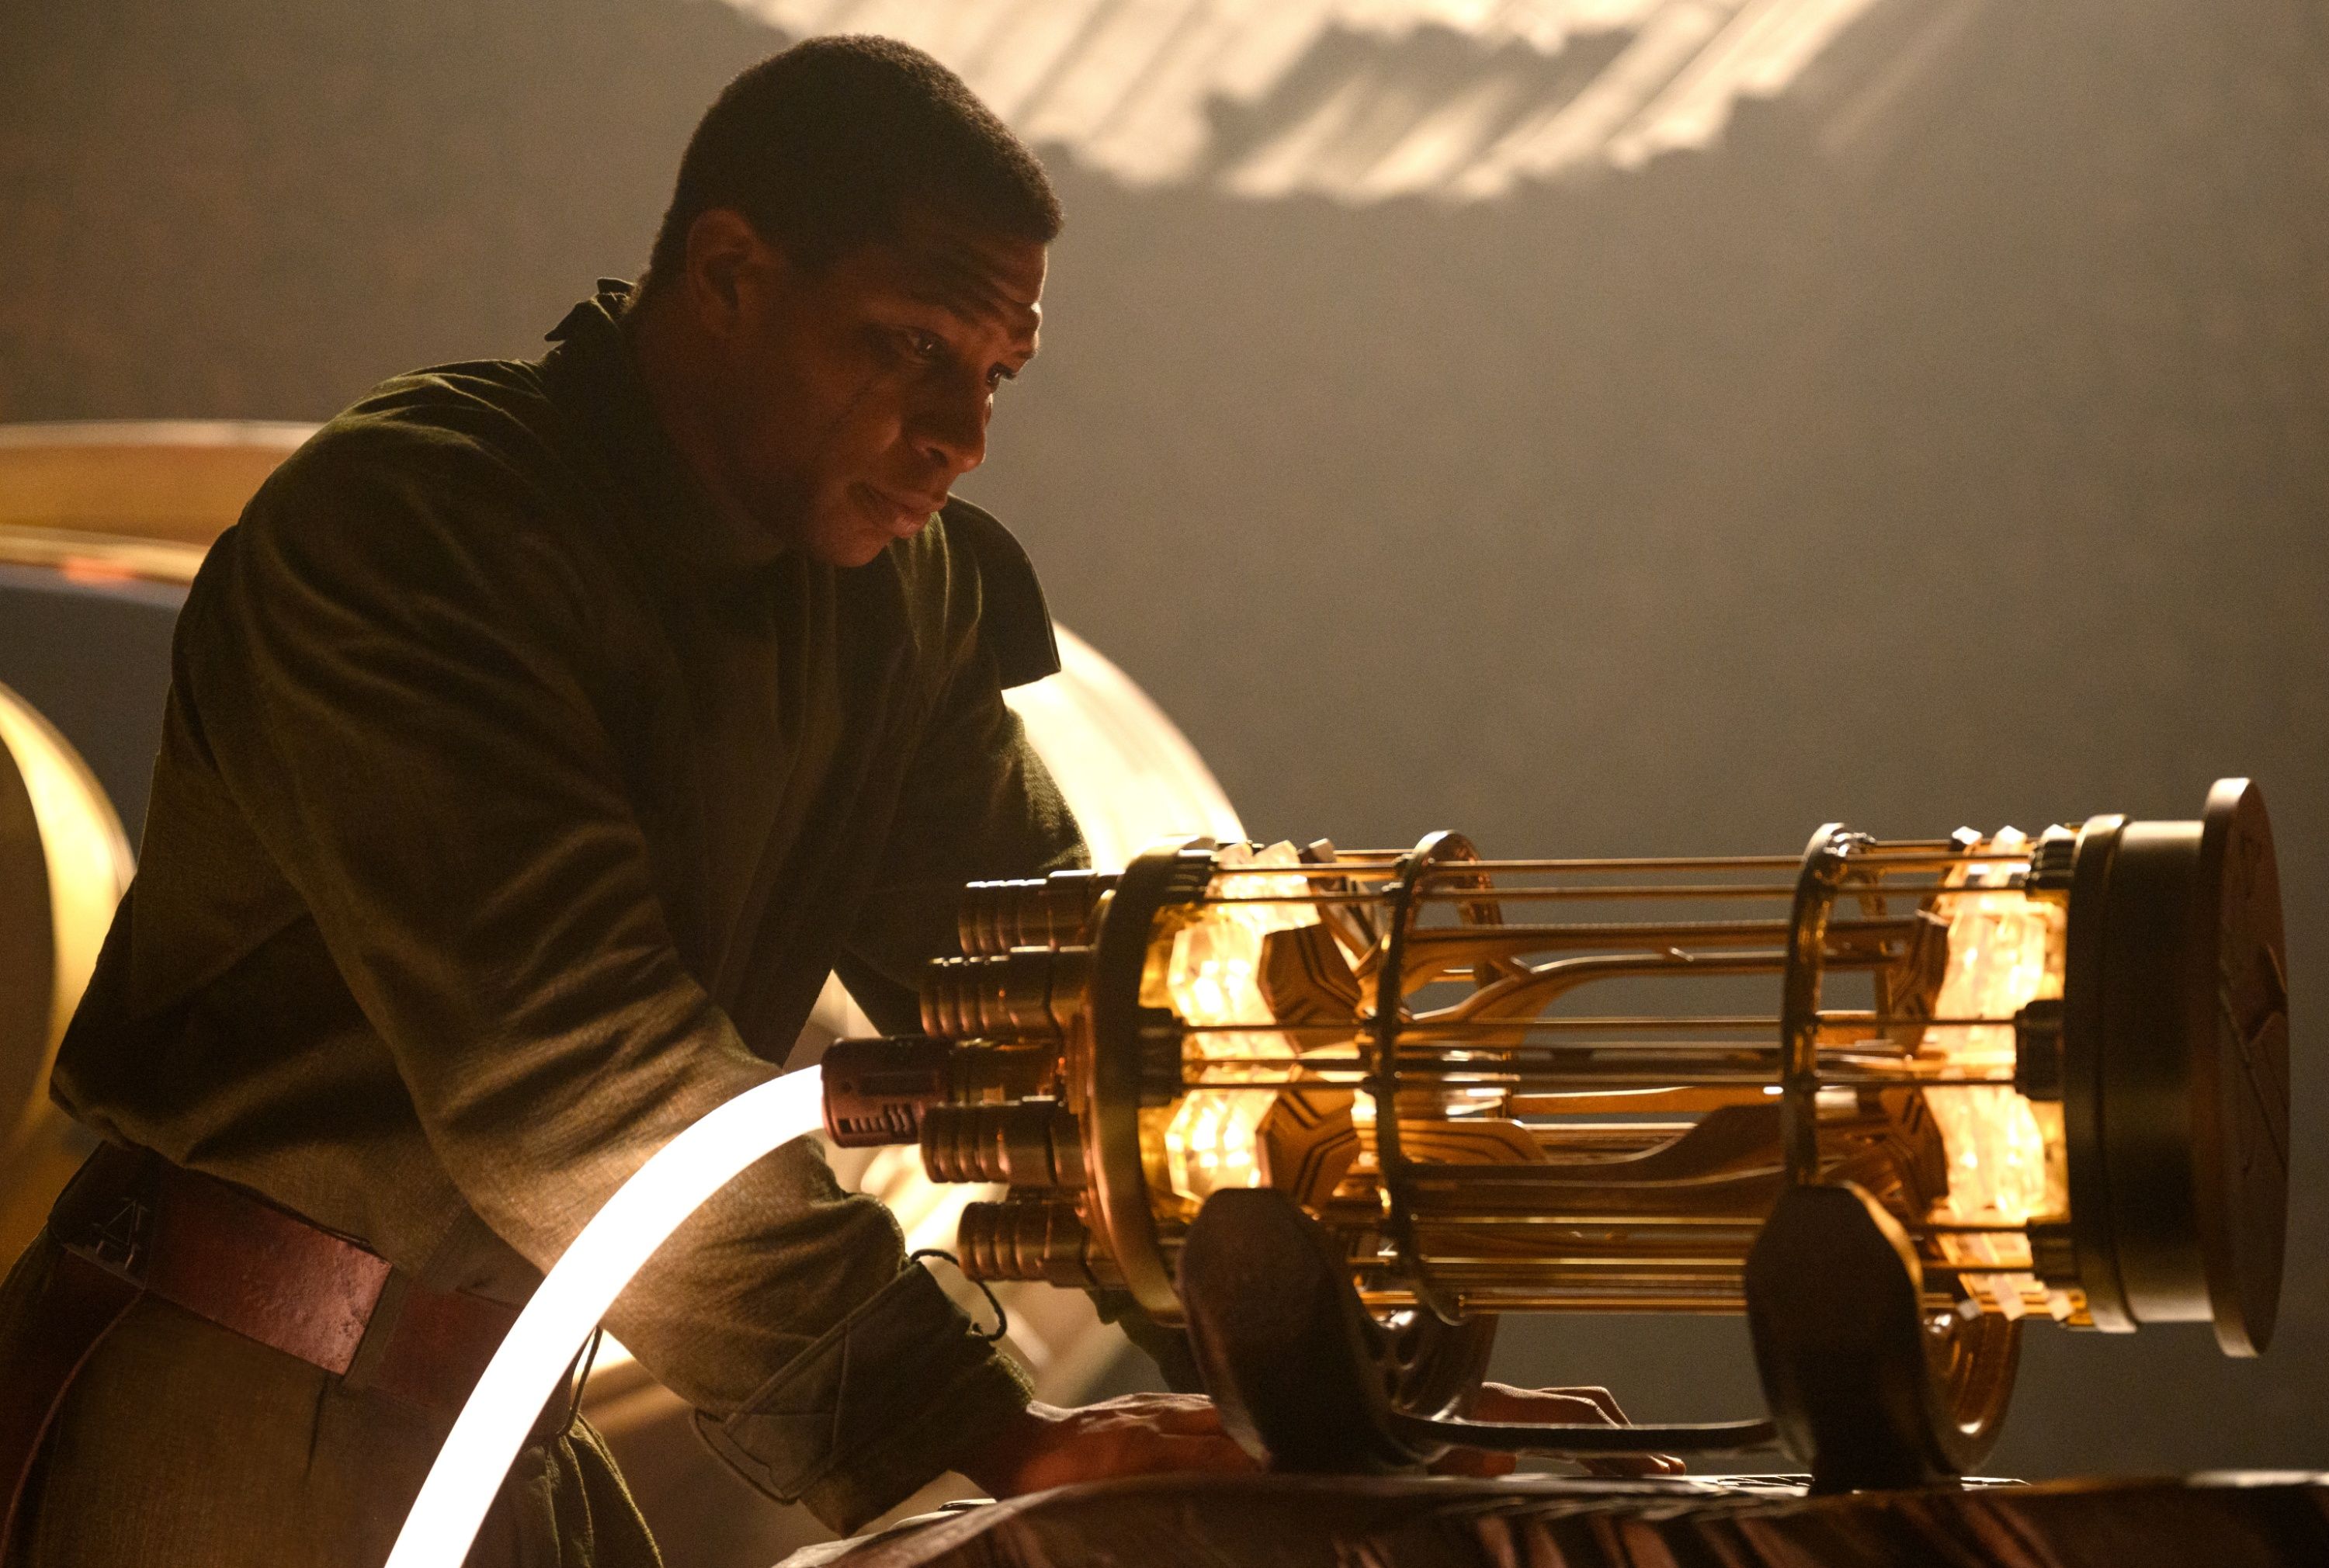 Jonathan Majors as Kang the Conqueror in Ant-Man and The Wasp: Quantumania